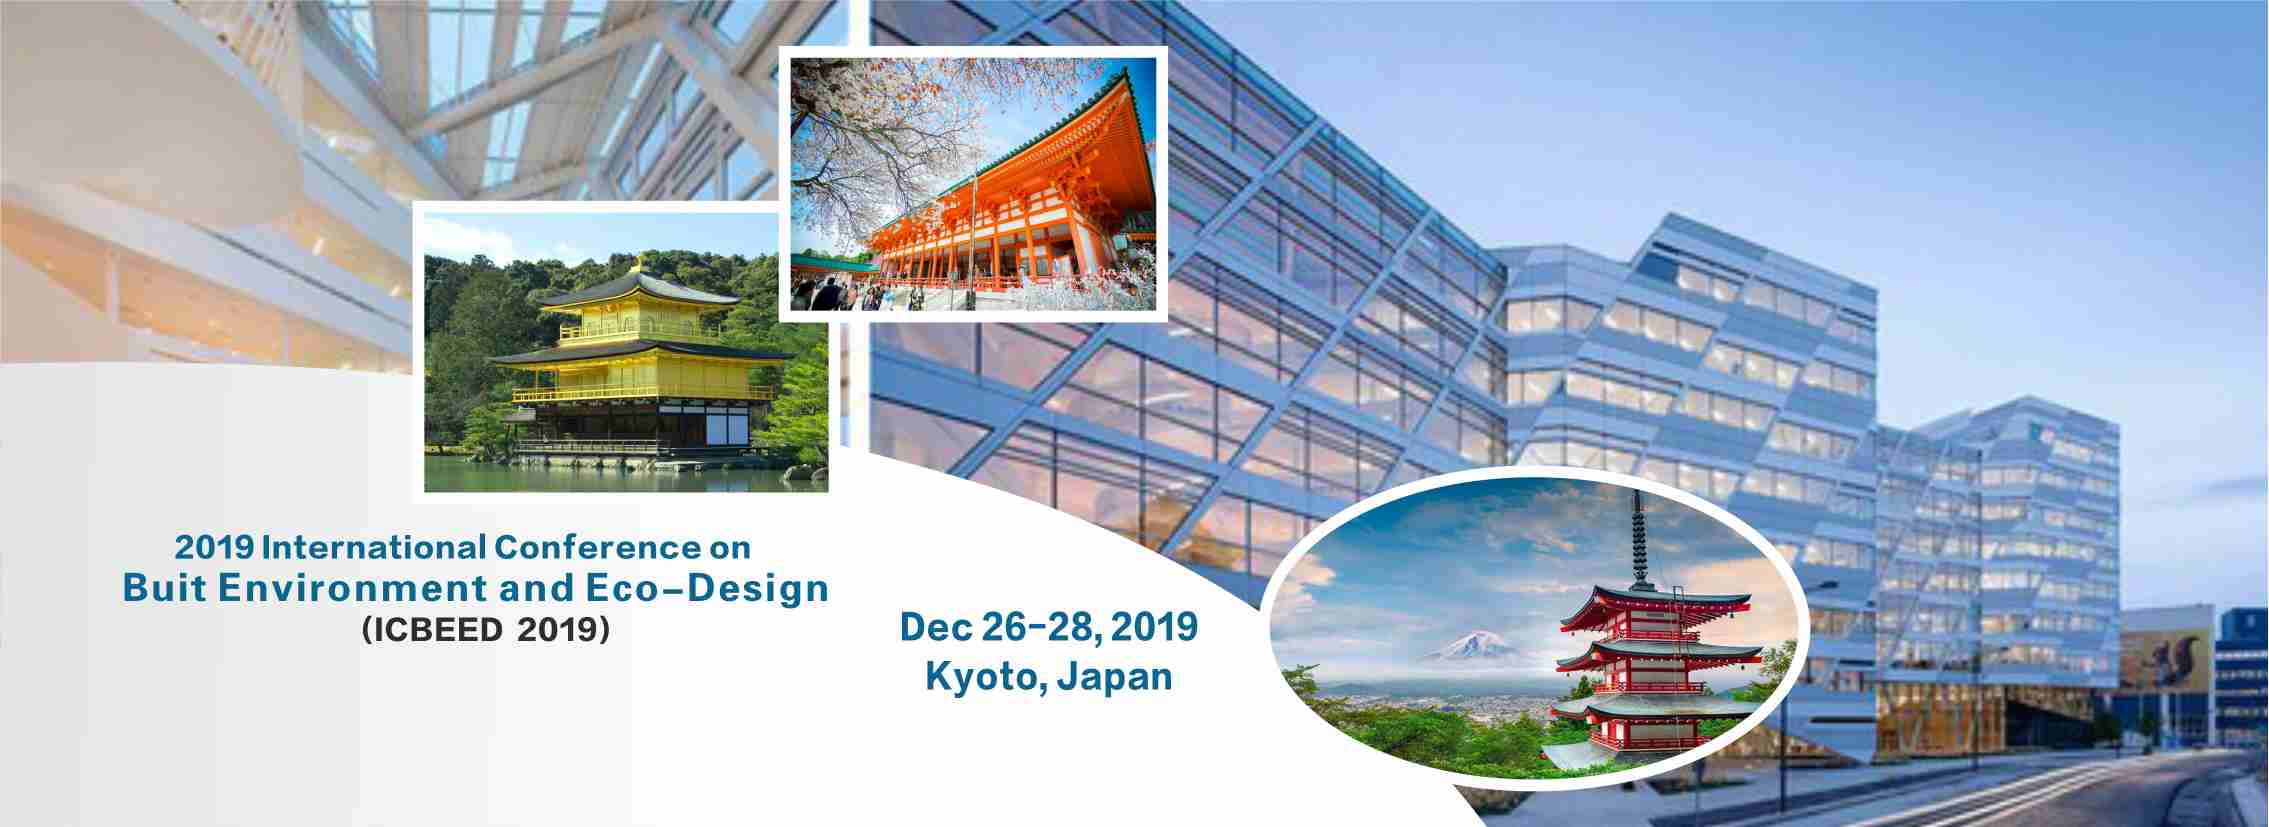 2019 International Conference on Built Environment and Eco-Design (ICBEED 2019)